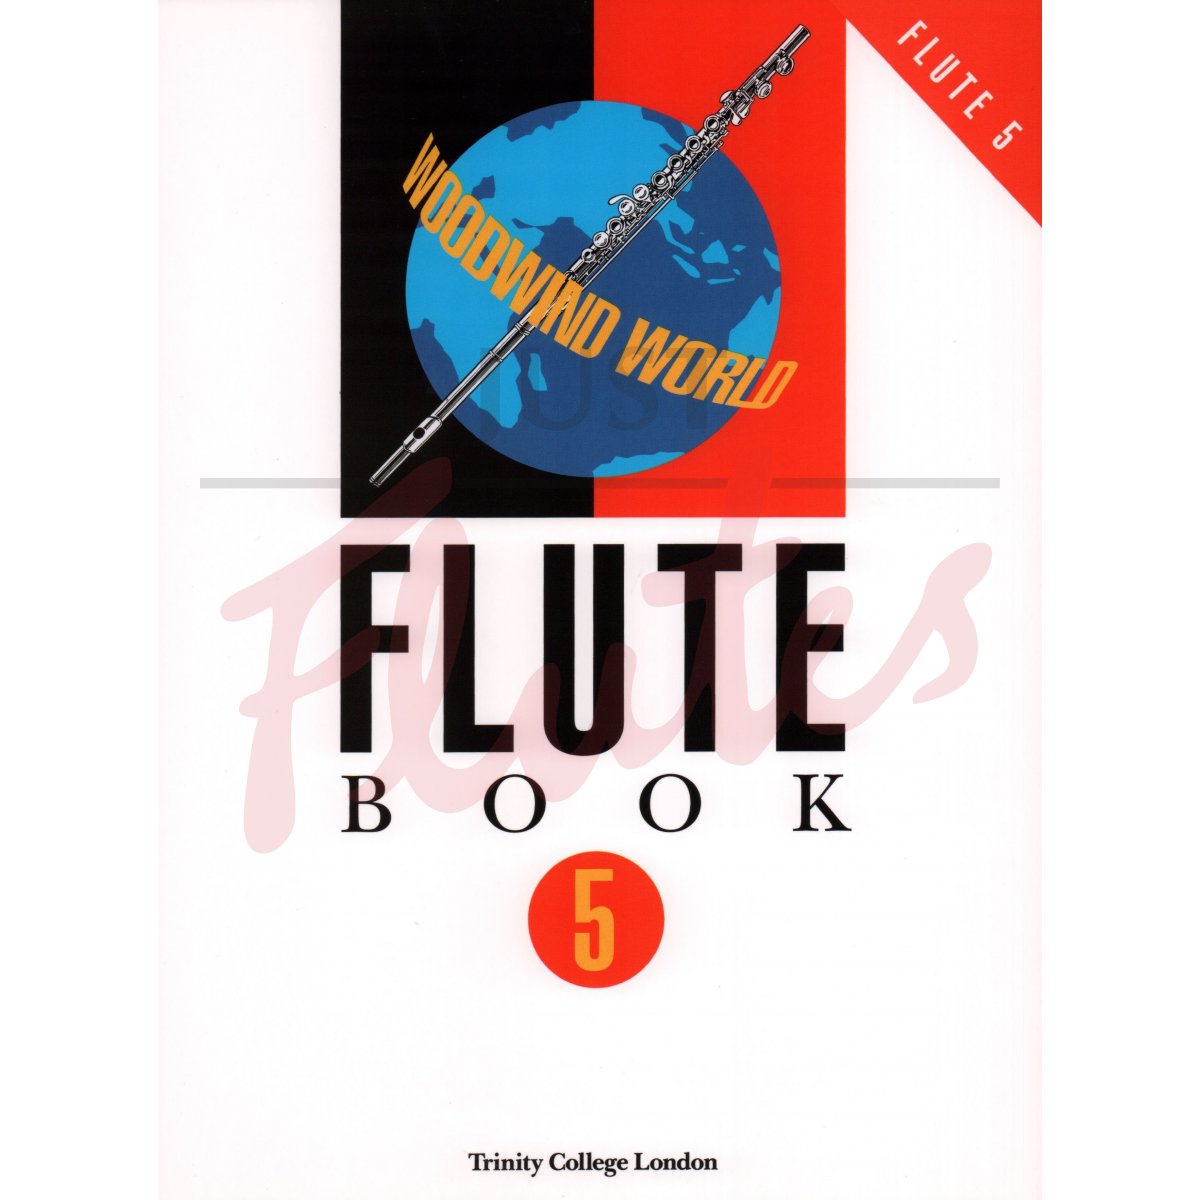 Woodwind World Flute Book 5 (Complete)